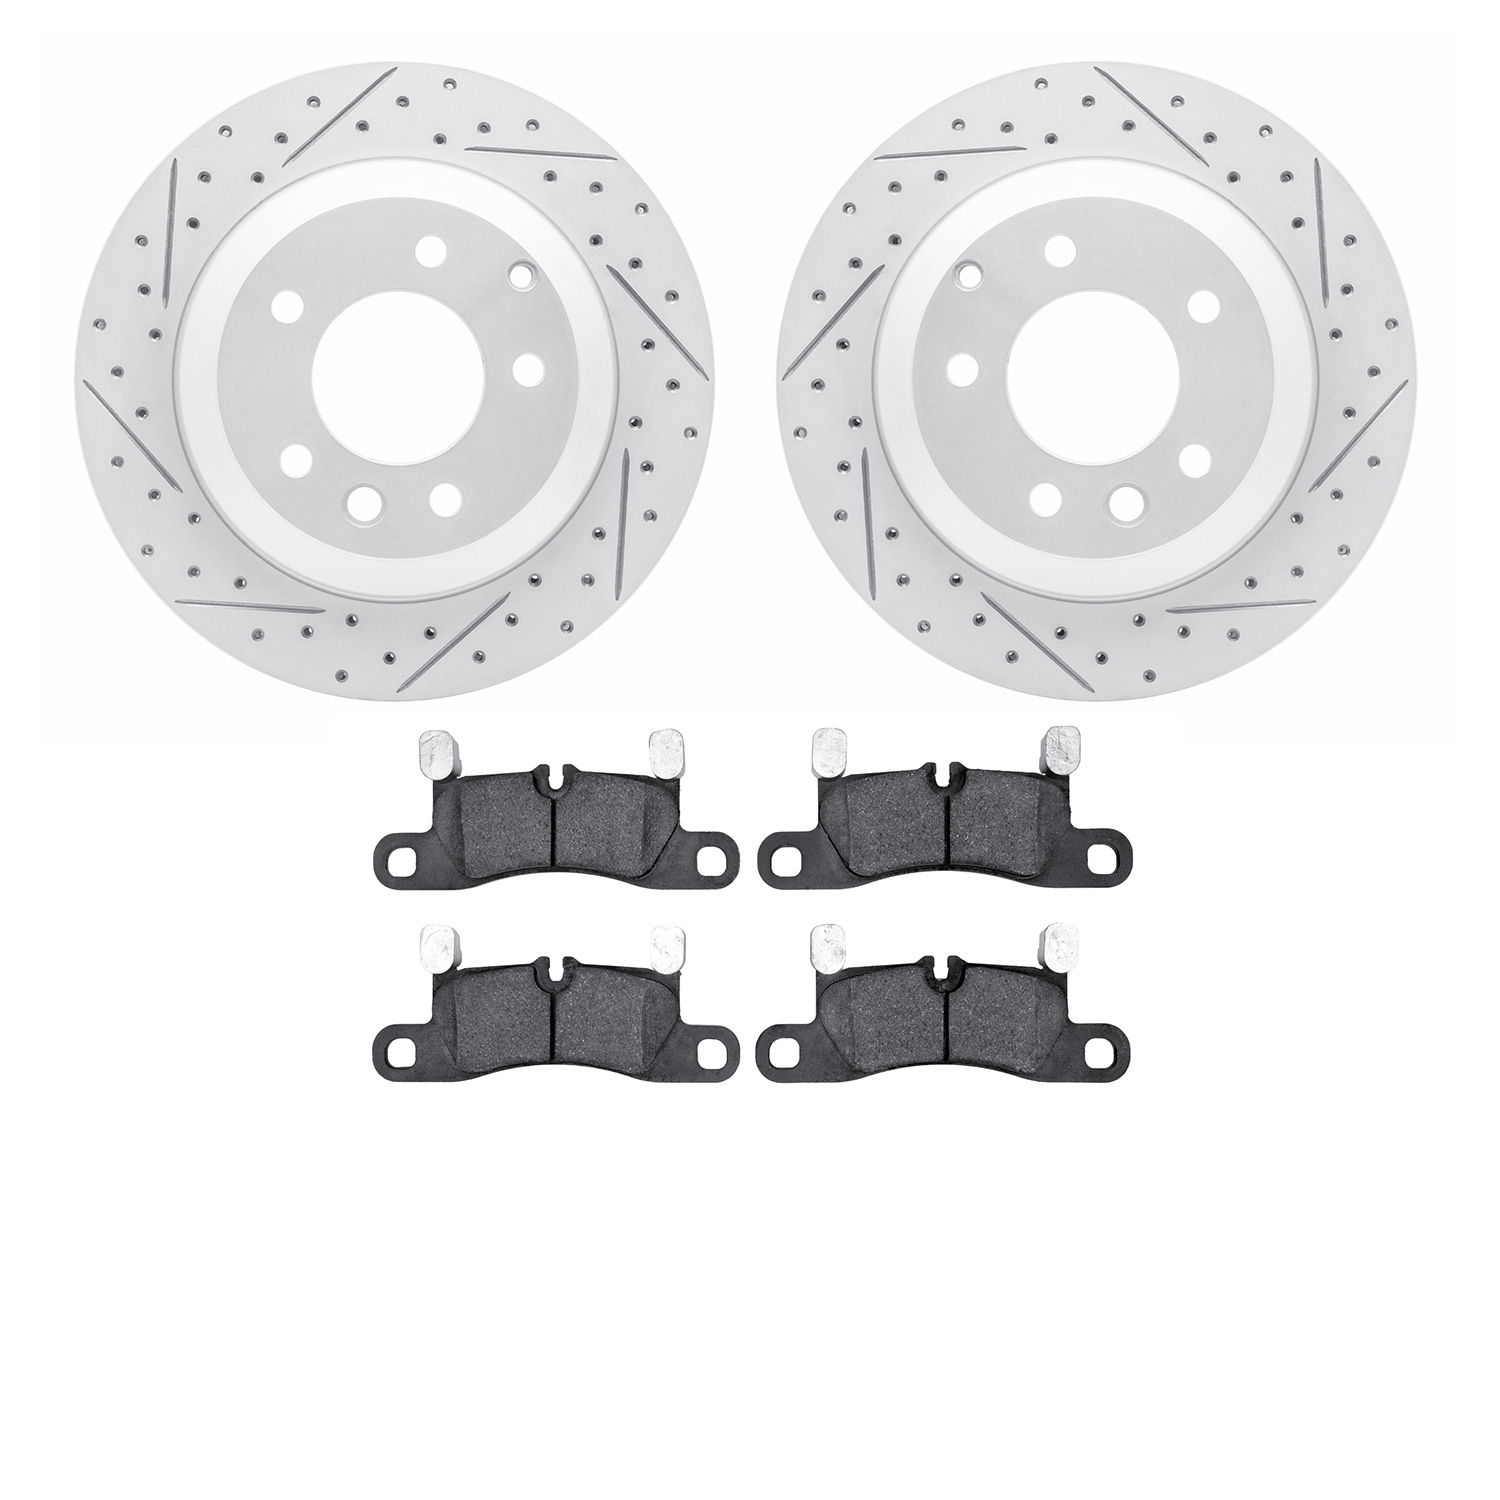 2502-74089 Geoperformance Drilled/Slotted Rotors w/5000 Advanced Brake Pads Kit, 2011-2014 Porsche, Position: Rear